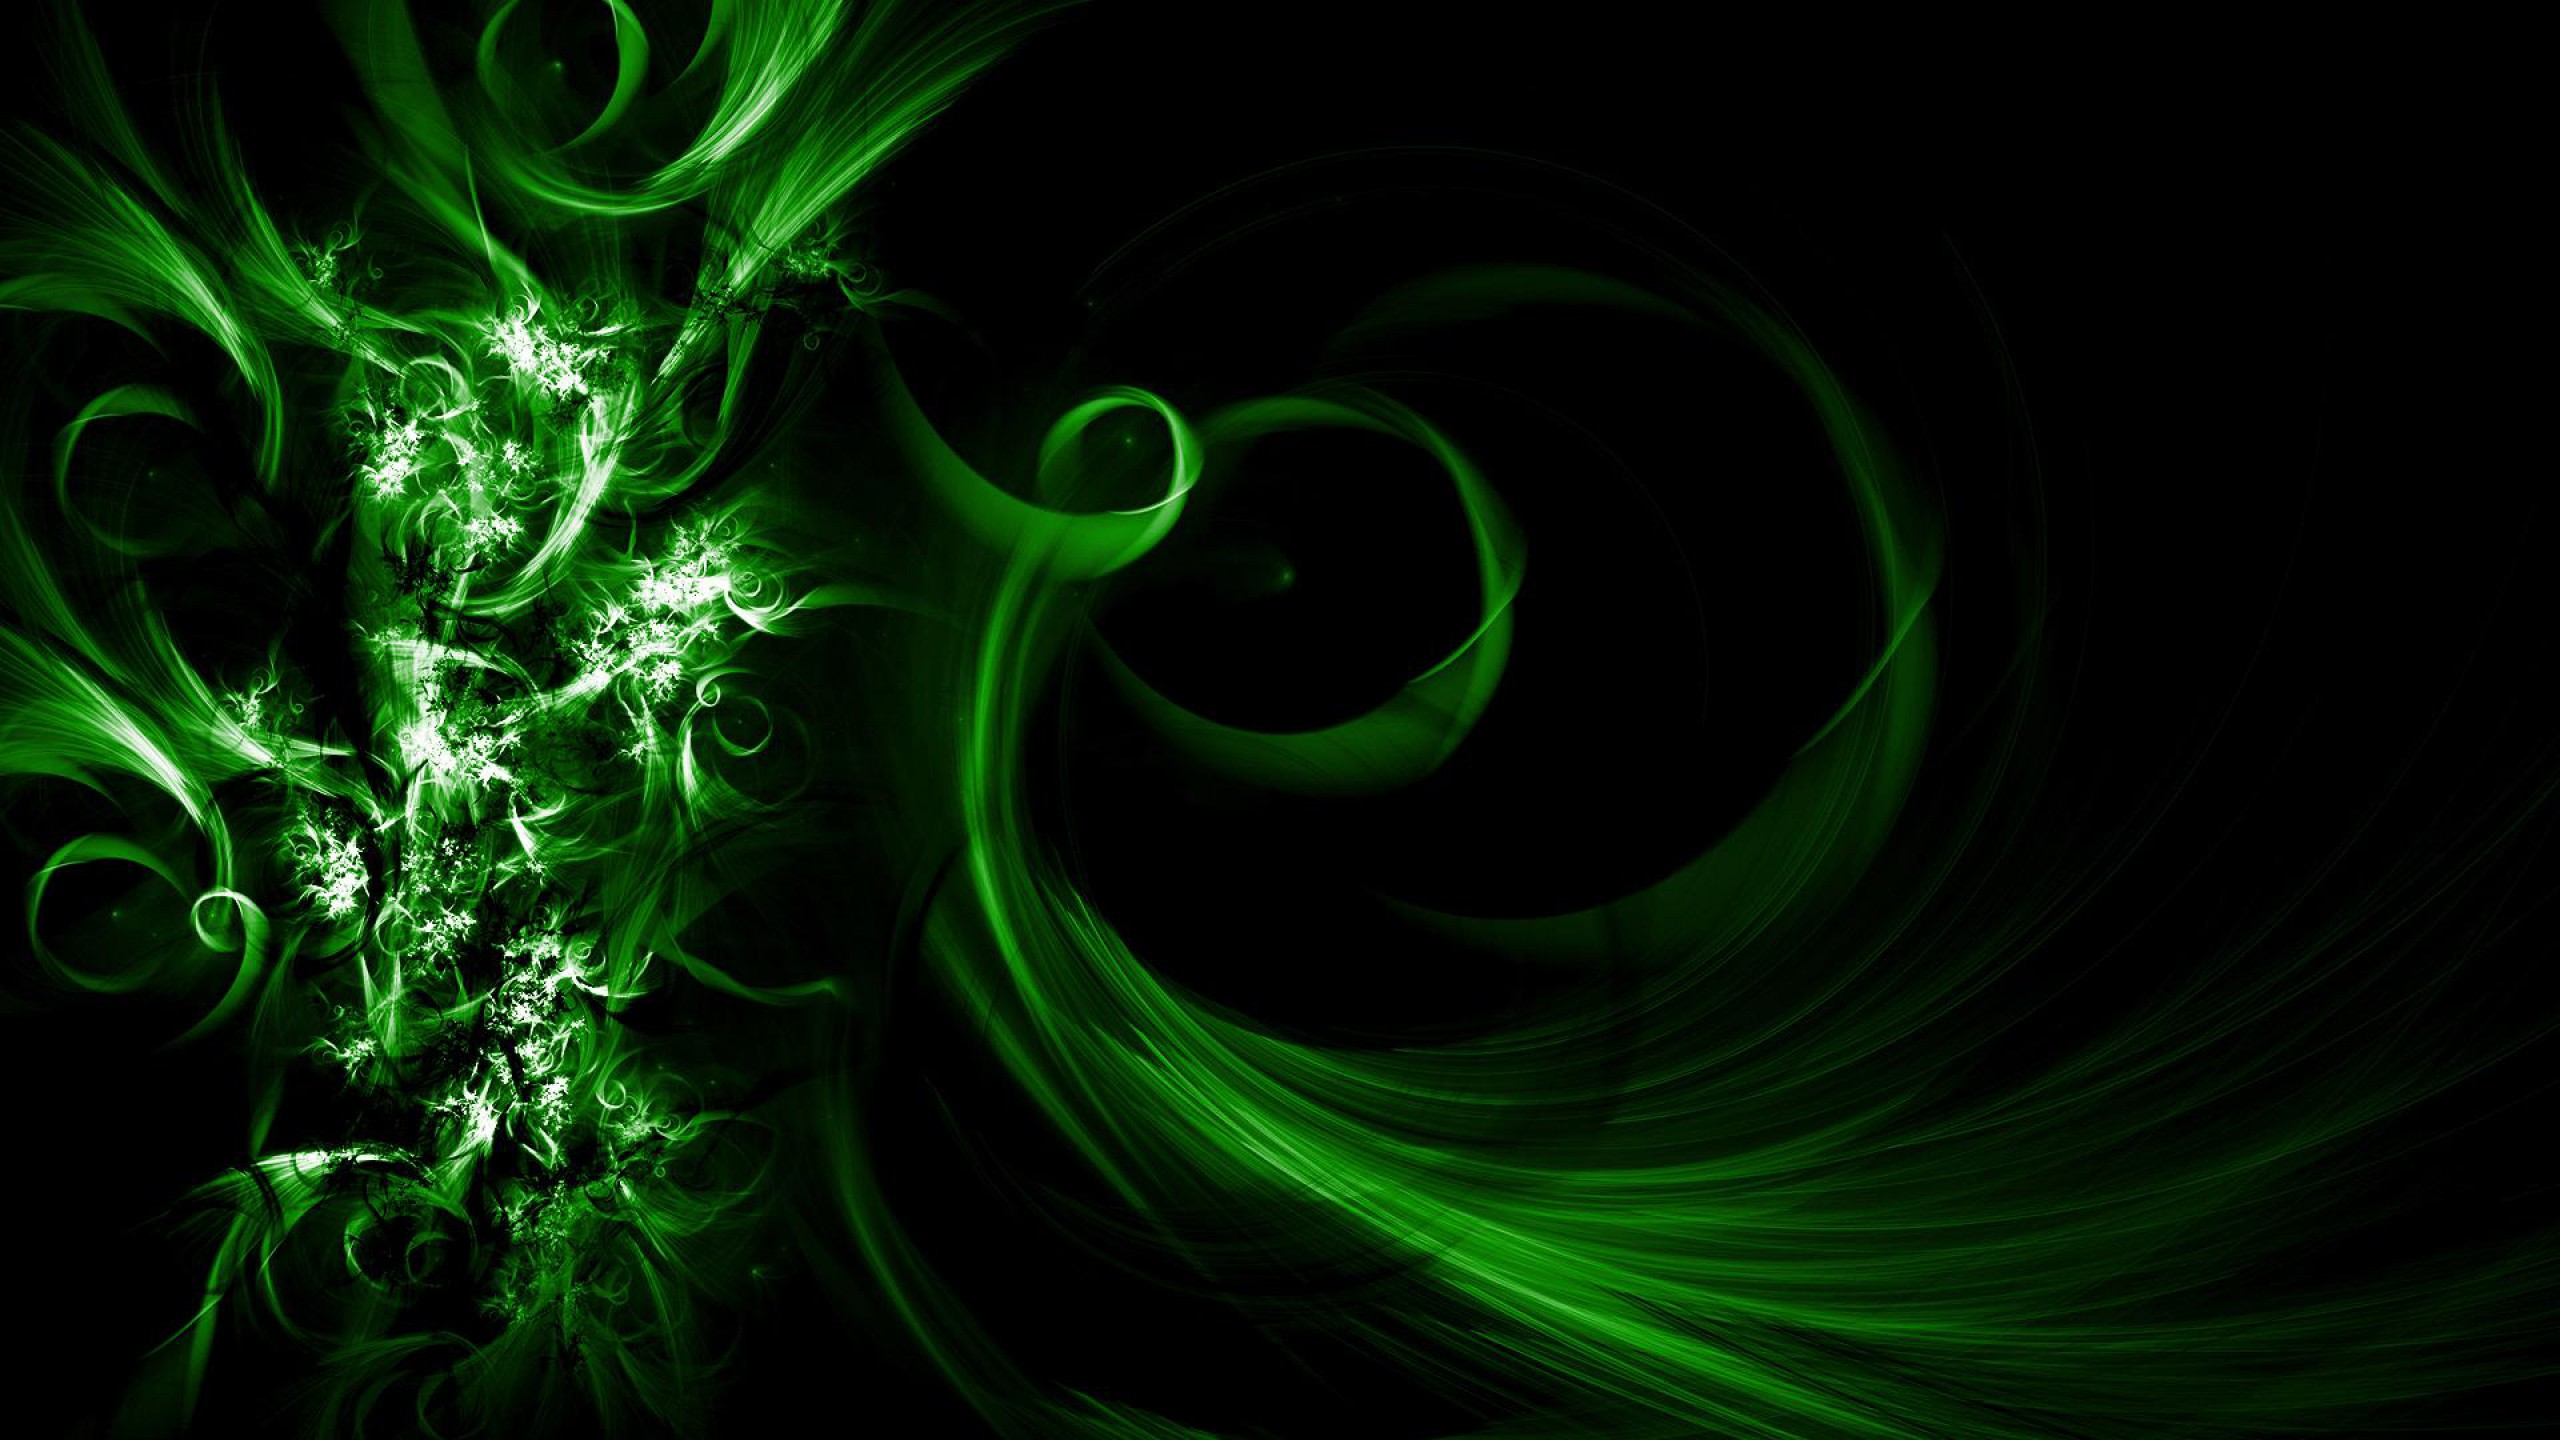 Cool Abstract Wallpaper With An Image Of Dark Green Waves HD